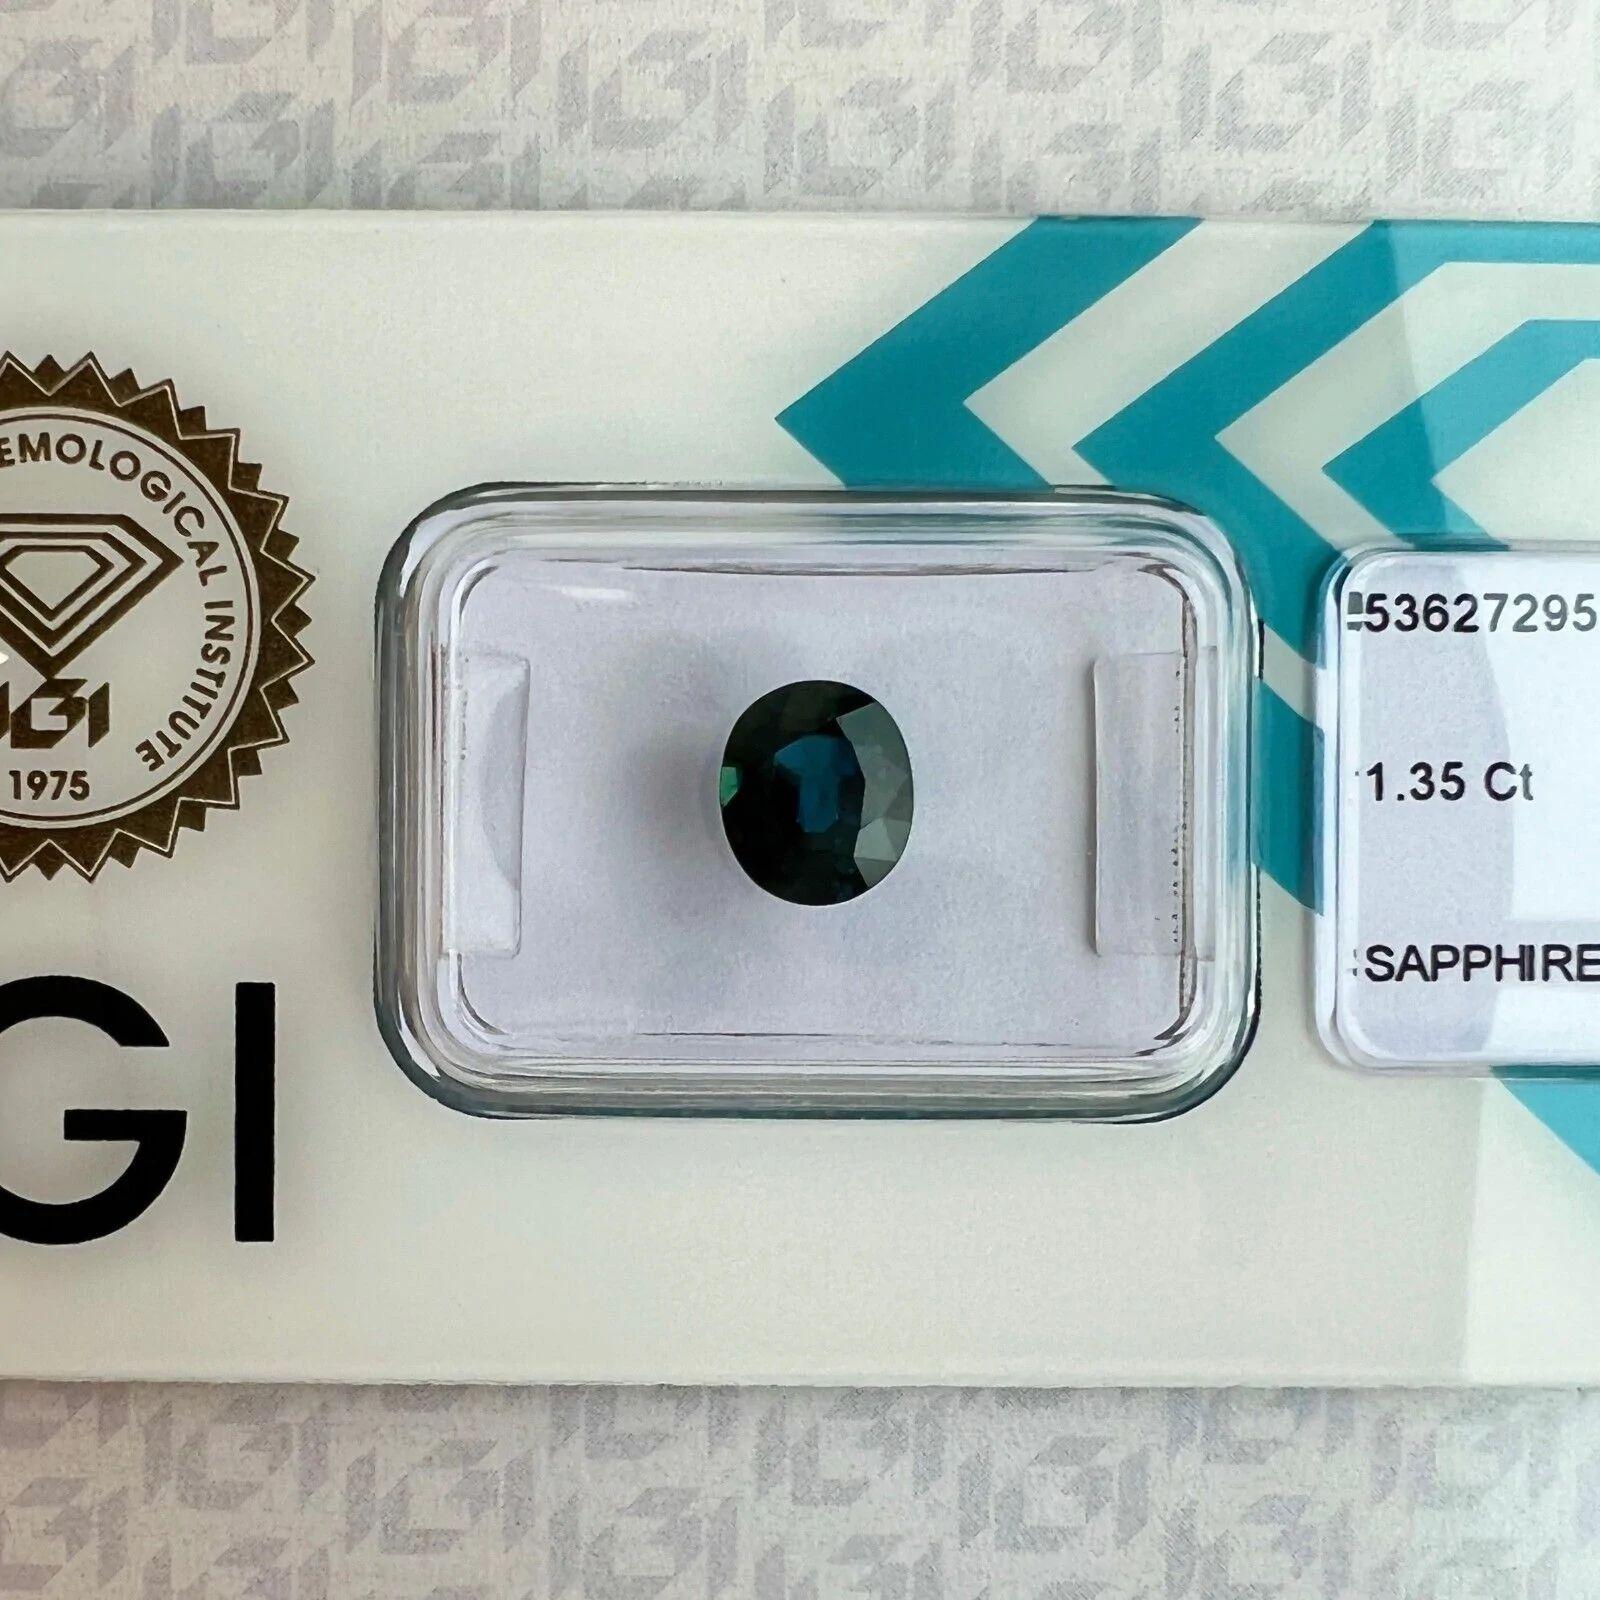 1.35ct Deep Blue Sapphire Rare Oval Cut IGI Certified Loose Gemstone in Blister For Sale 4